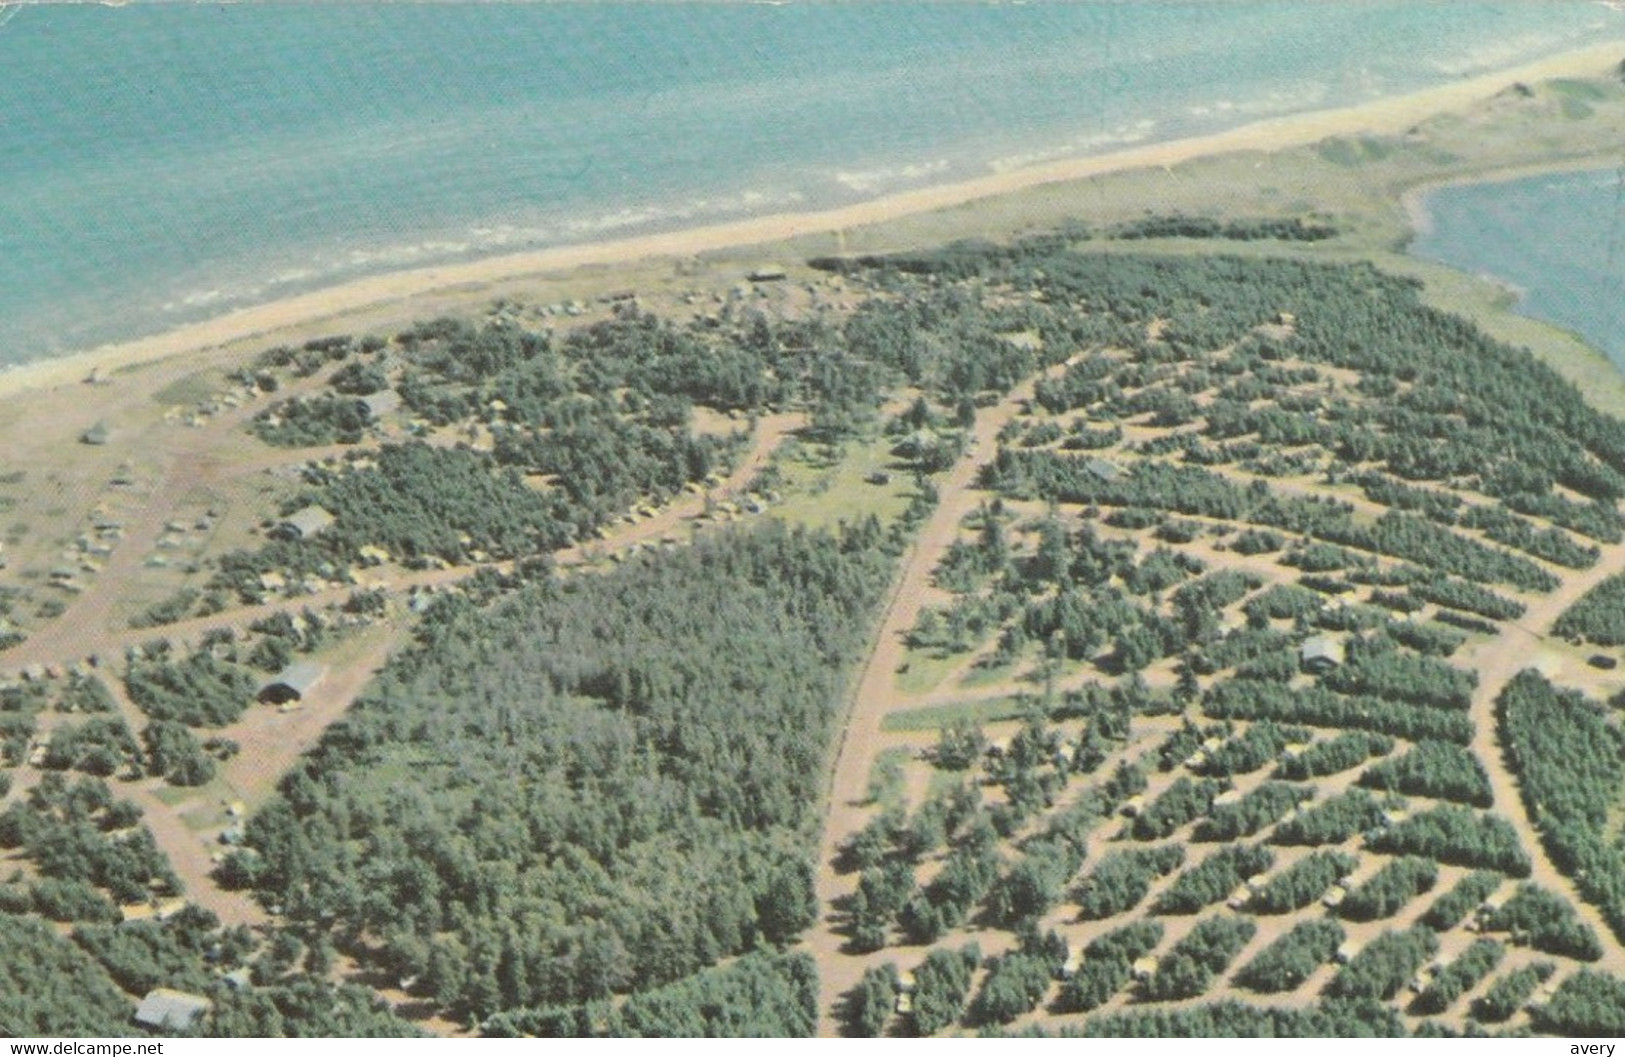 Aerial View Of Cavendish Camping Area, Prince Edward Island  Glue On Back Colle En Dos - Other & Unclassified